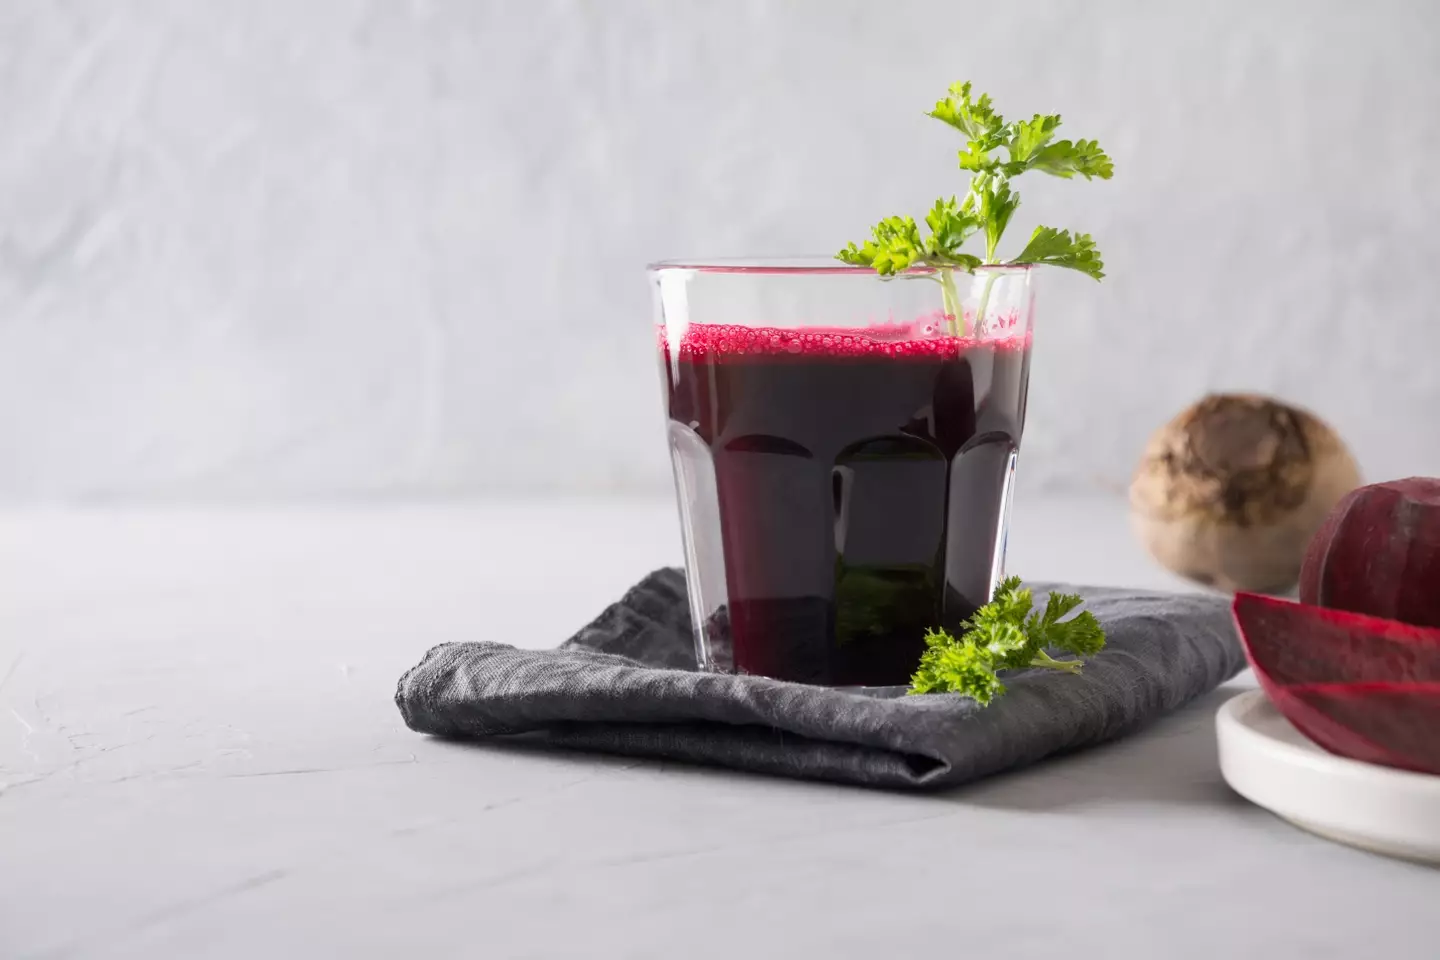 Many people blend beetroot into smoothies.